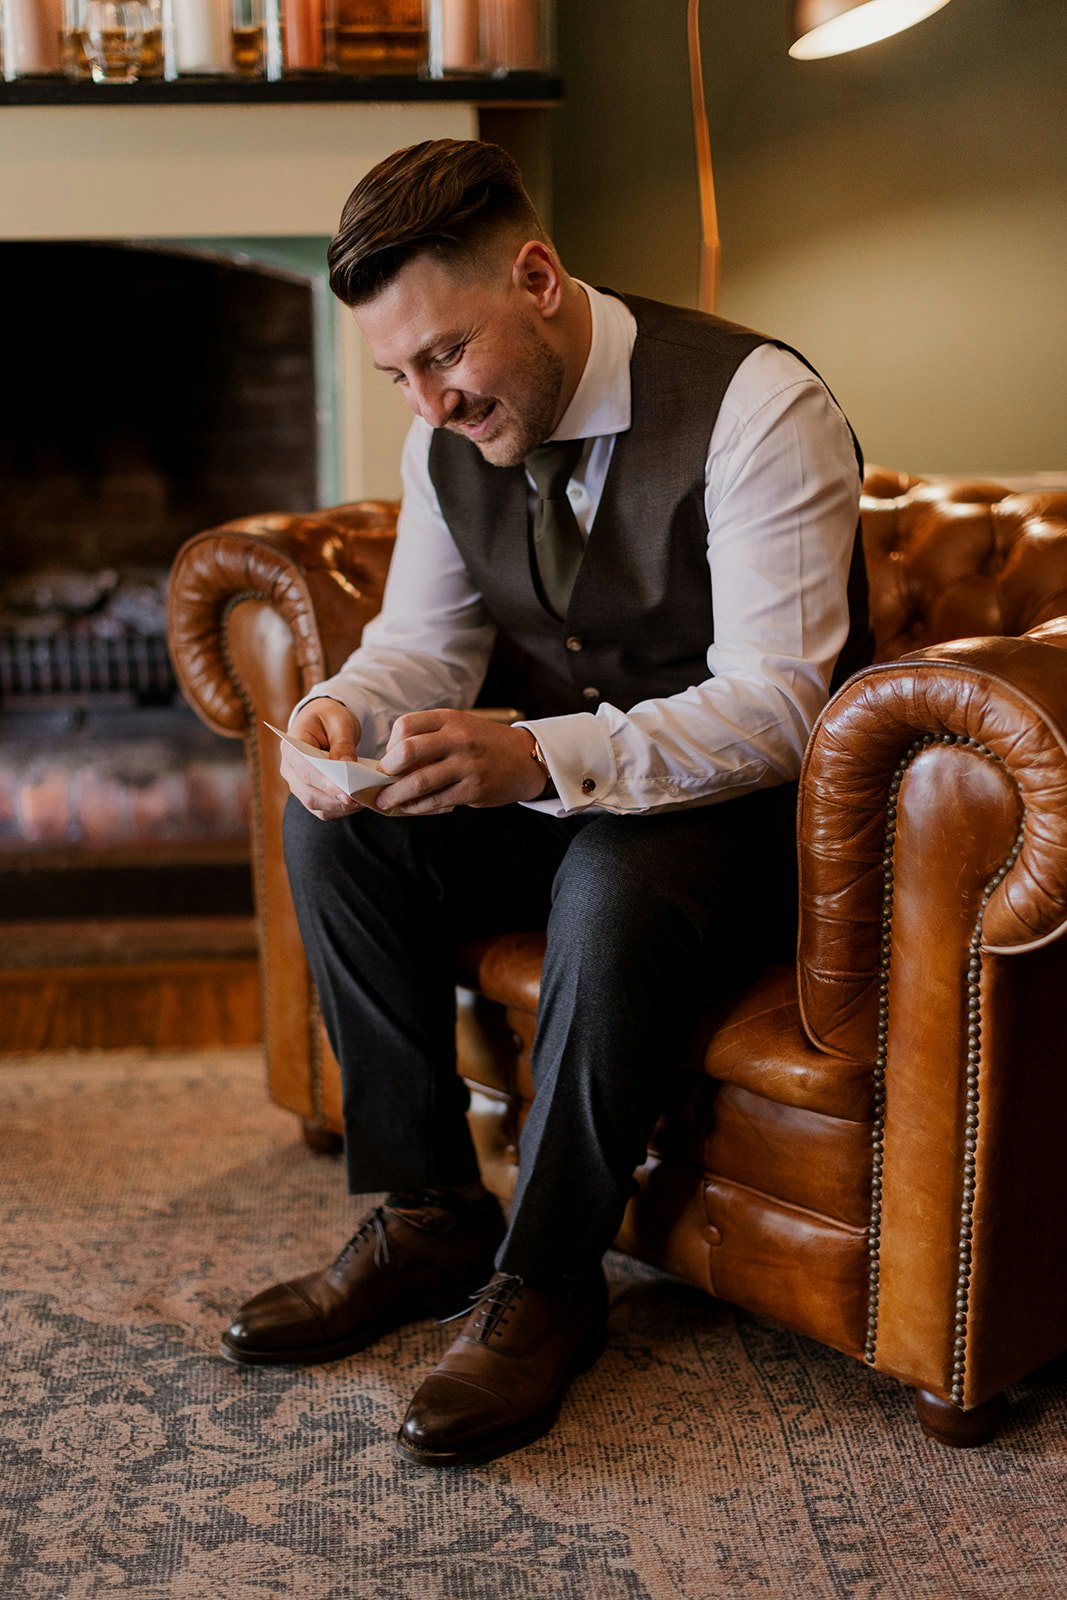 Groom reading card from wife on wedding day